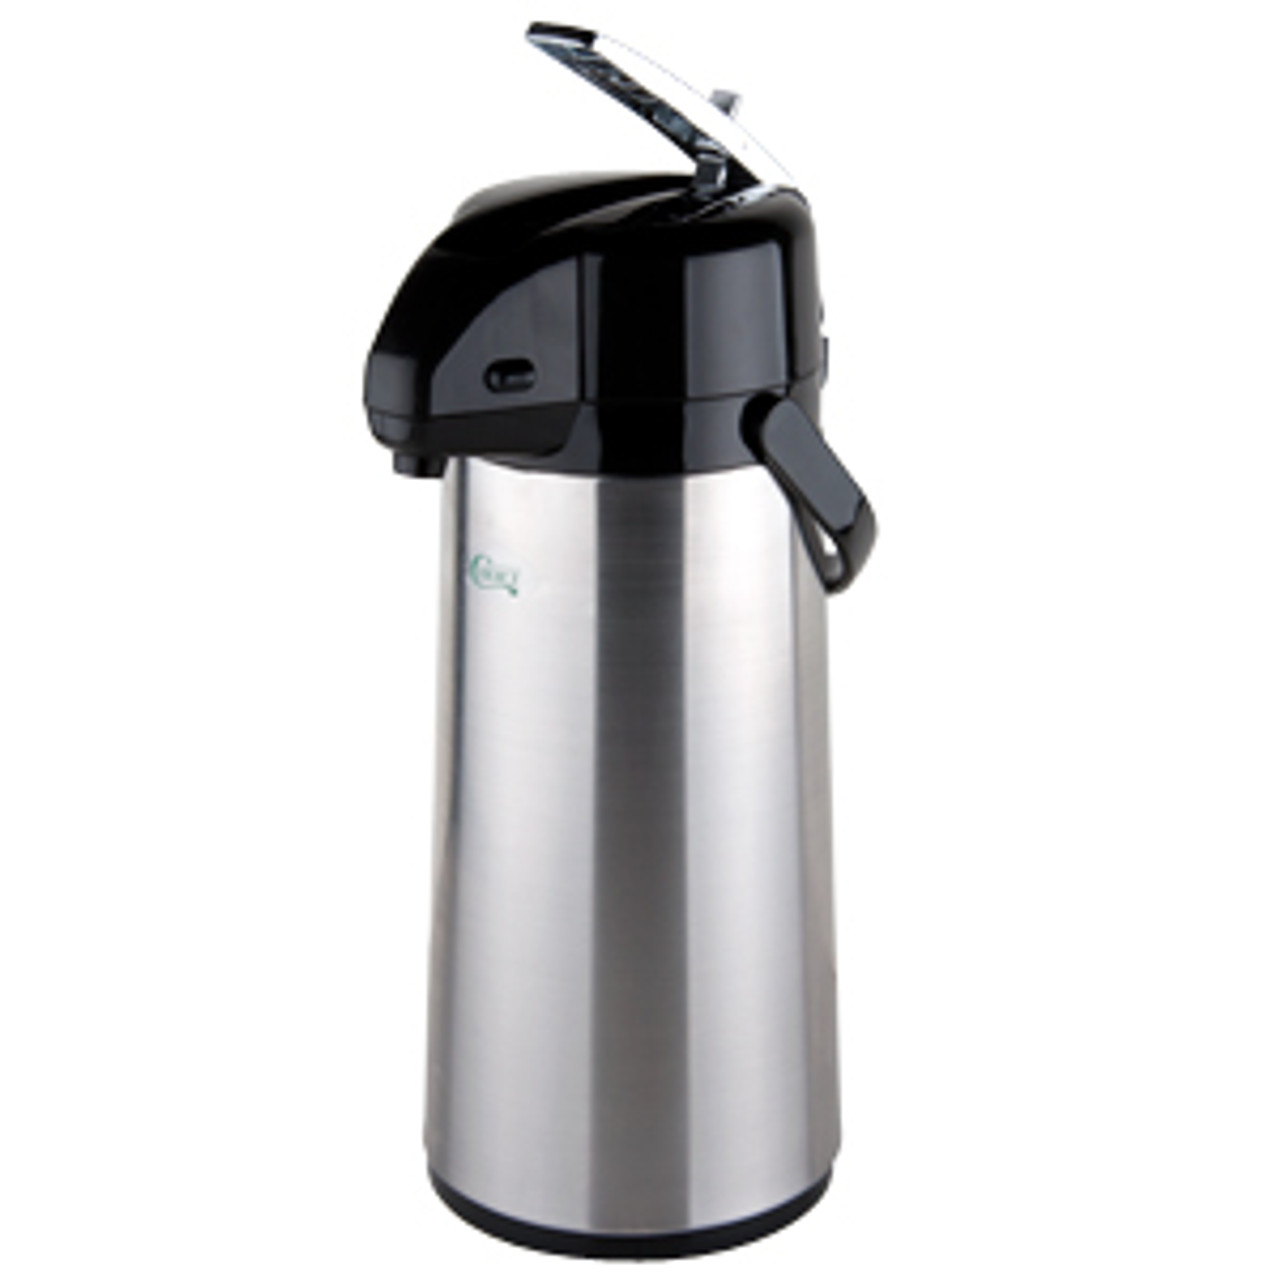 Airpot, 2.5L, Stainless Steel